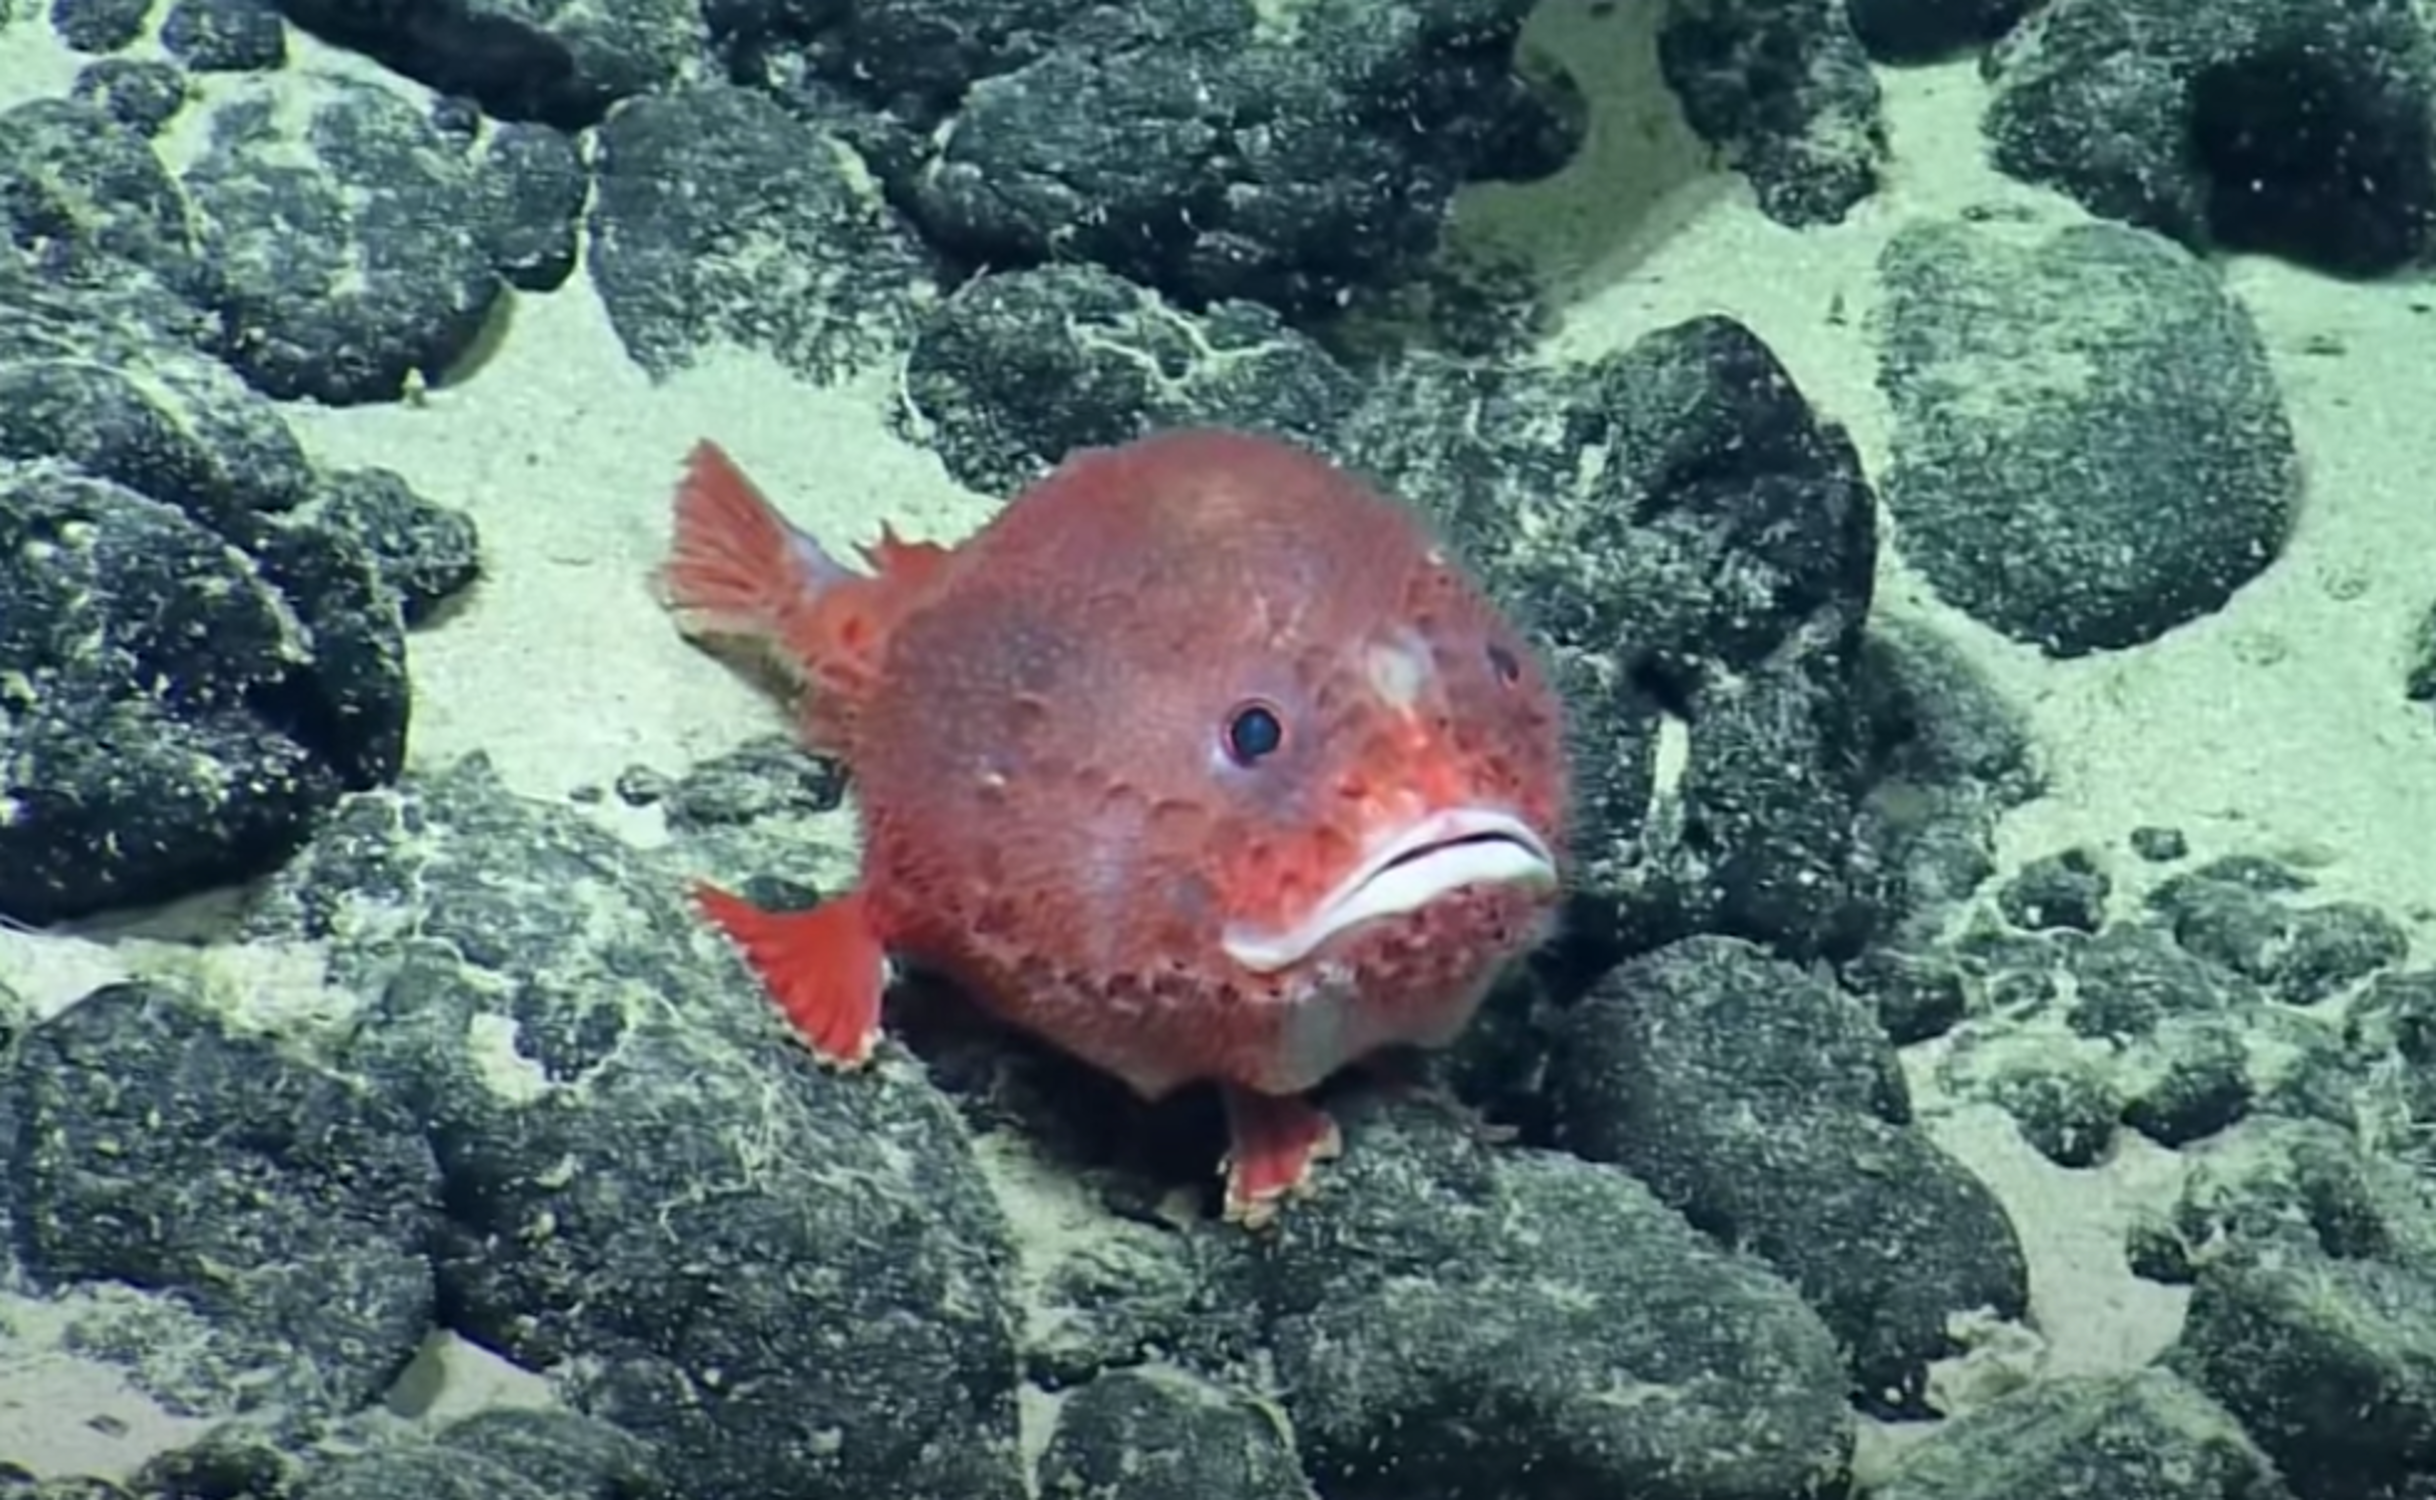 Super Cute Pink Anglerfish With Frowny Face Filmed on Bottom of Ocean